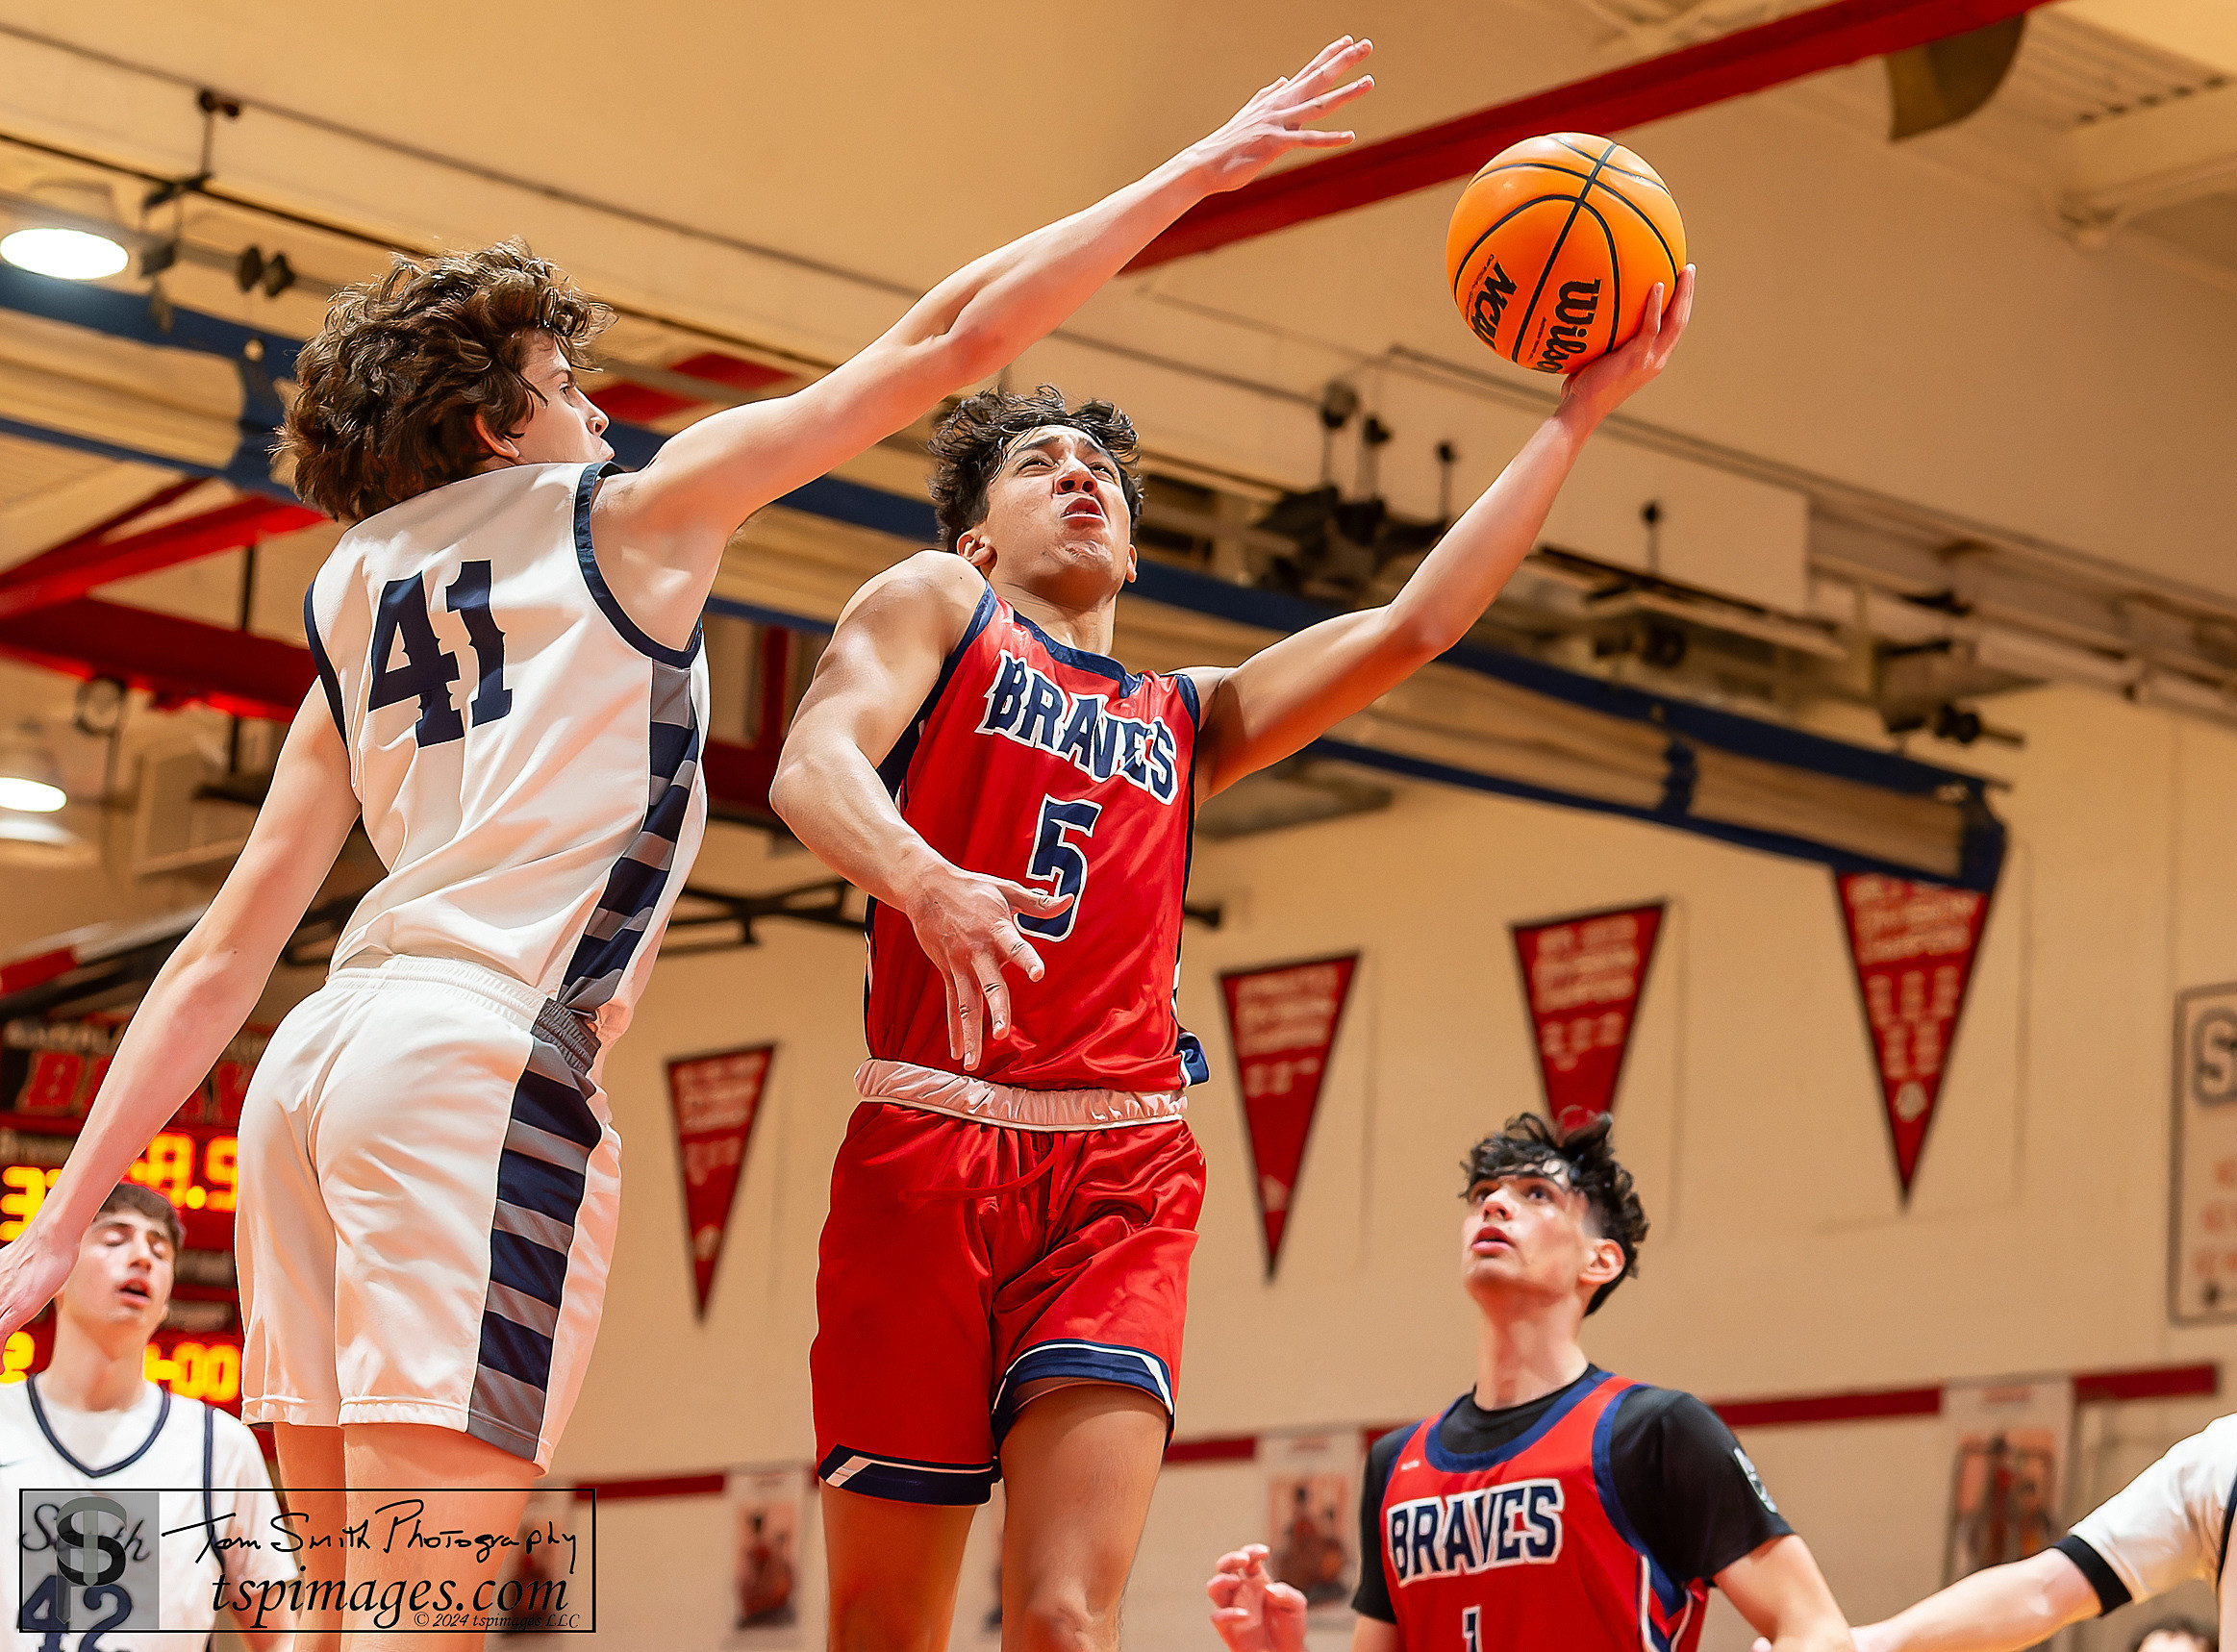 Manalapan senior Anthony Leger drives on Middletown South sophomore Beckett Oliver. (Photo: Tom Smith | tspsportsimages.com)